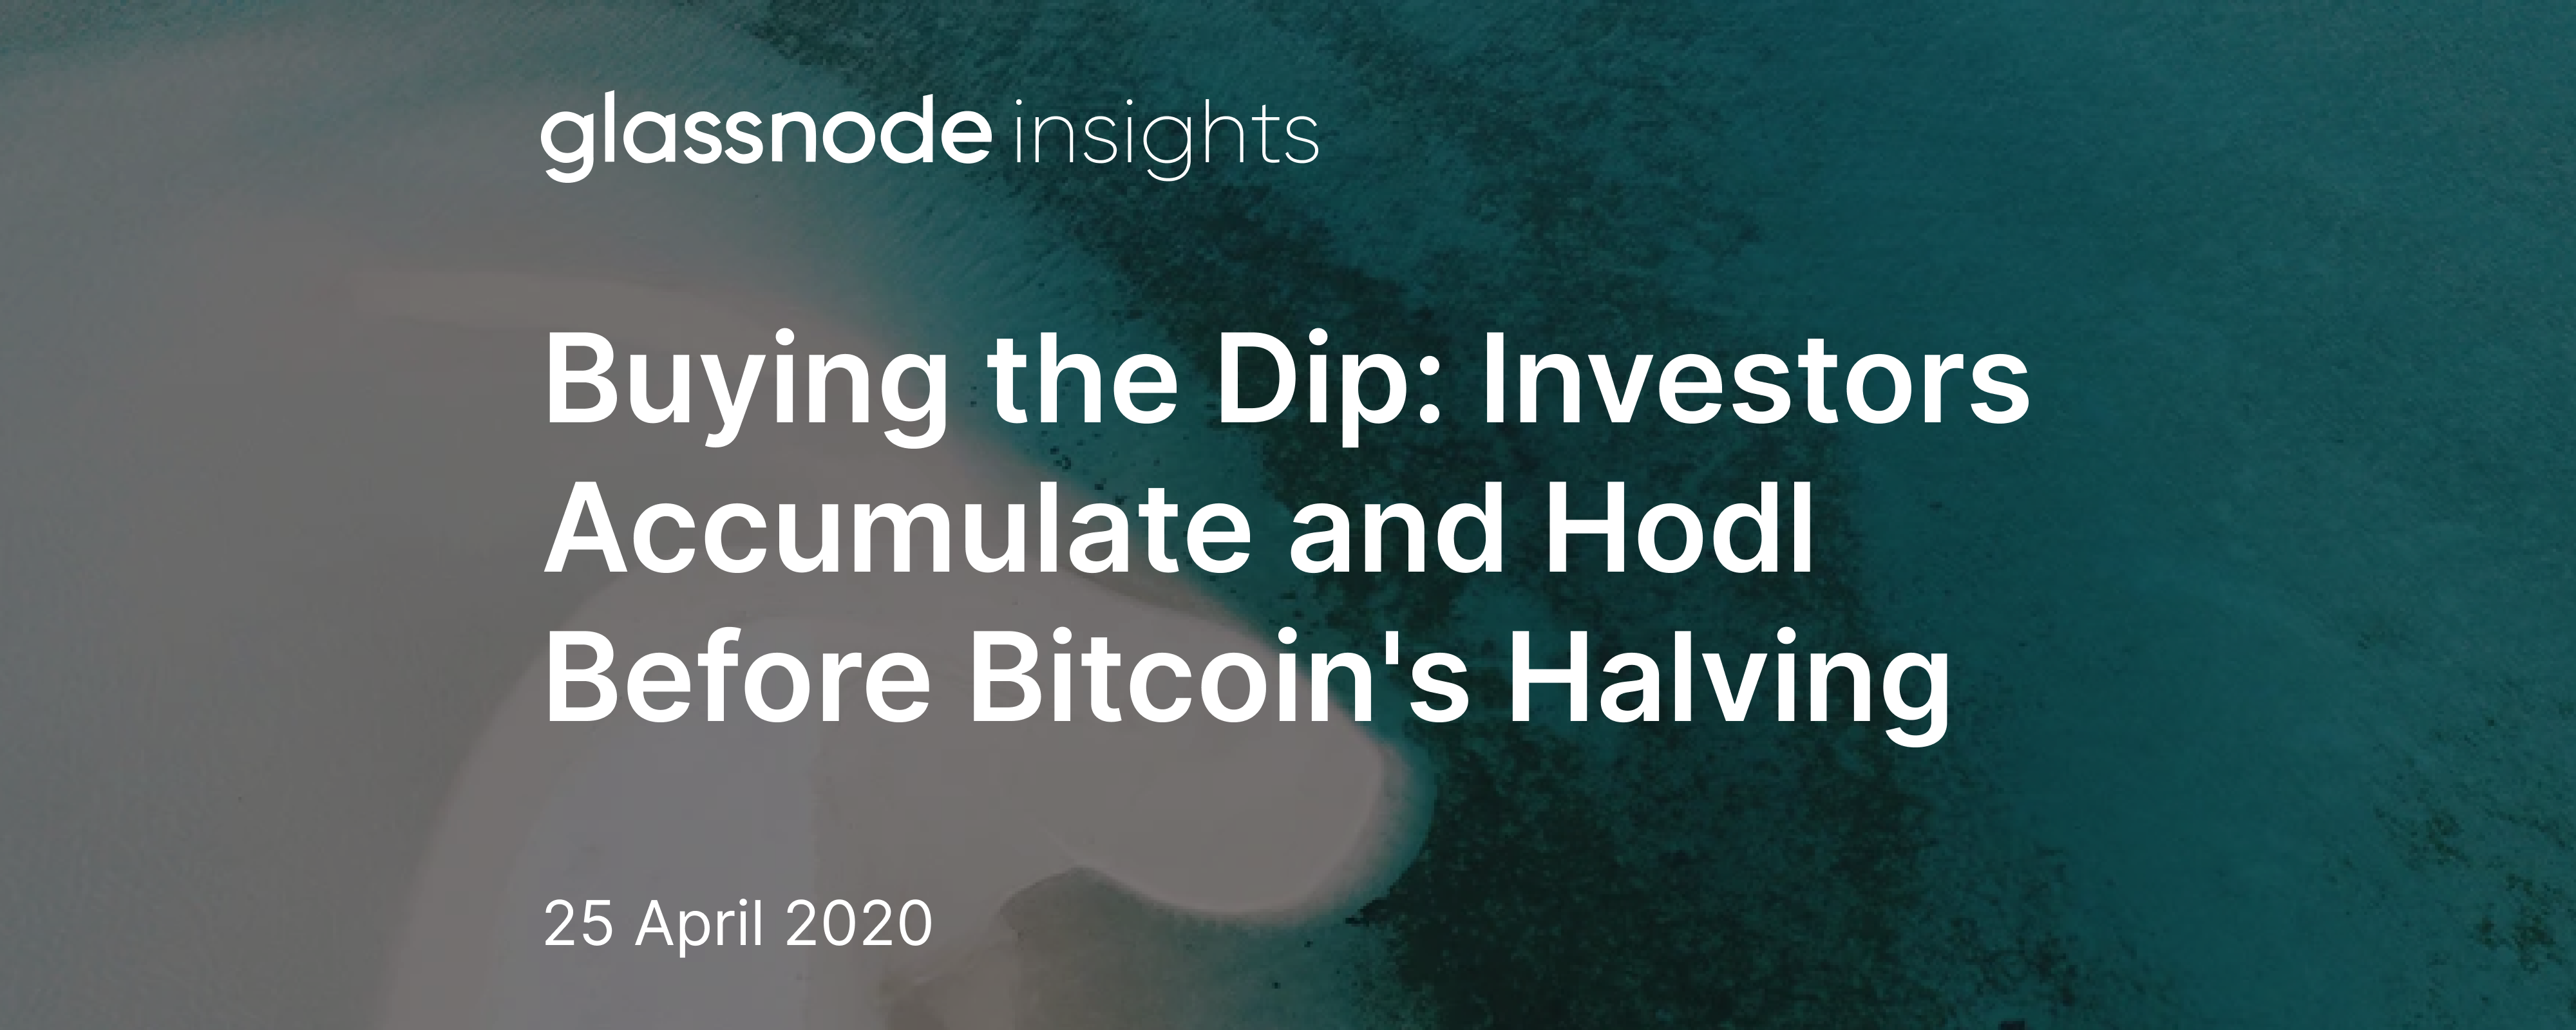 Buying the Dip: Investors Accumulate and Hodl Before Bitcoin's Halving